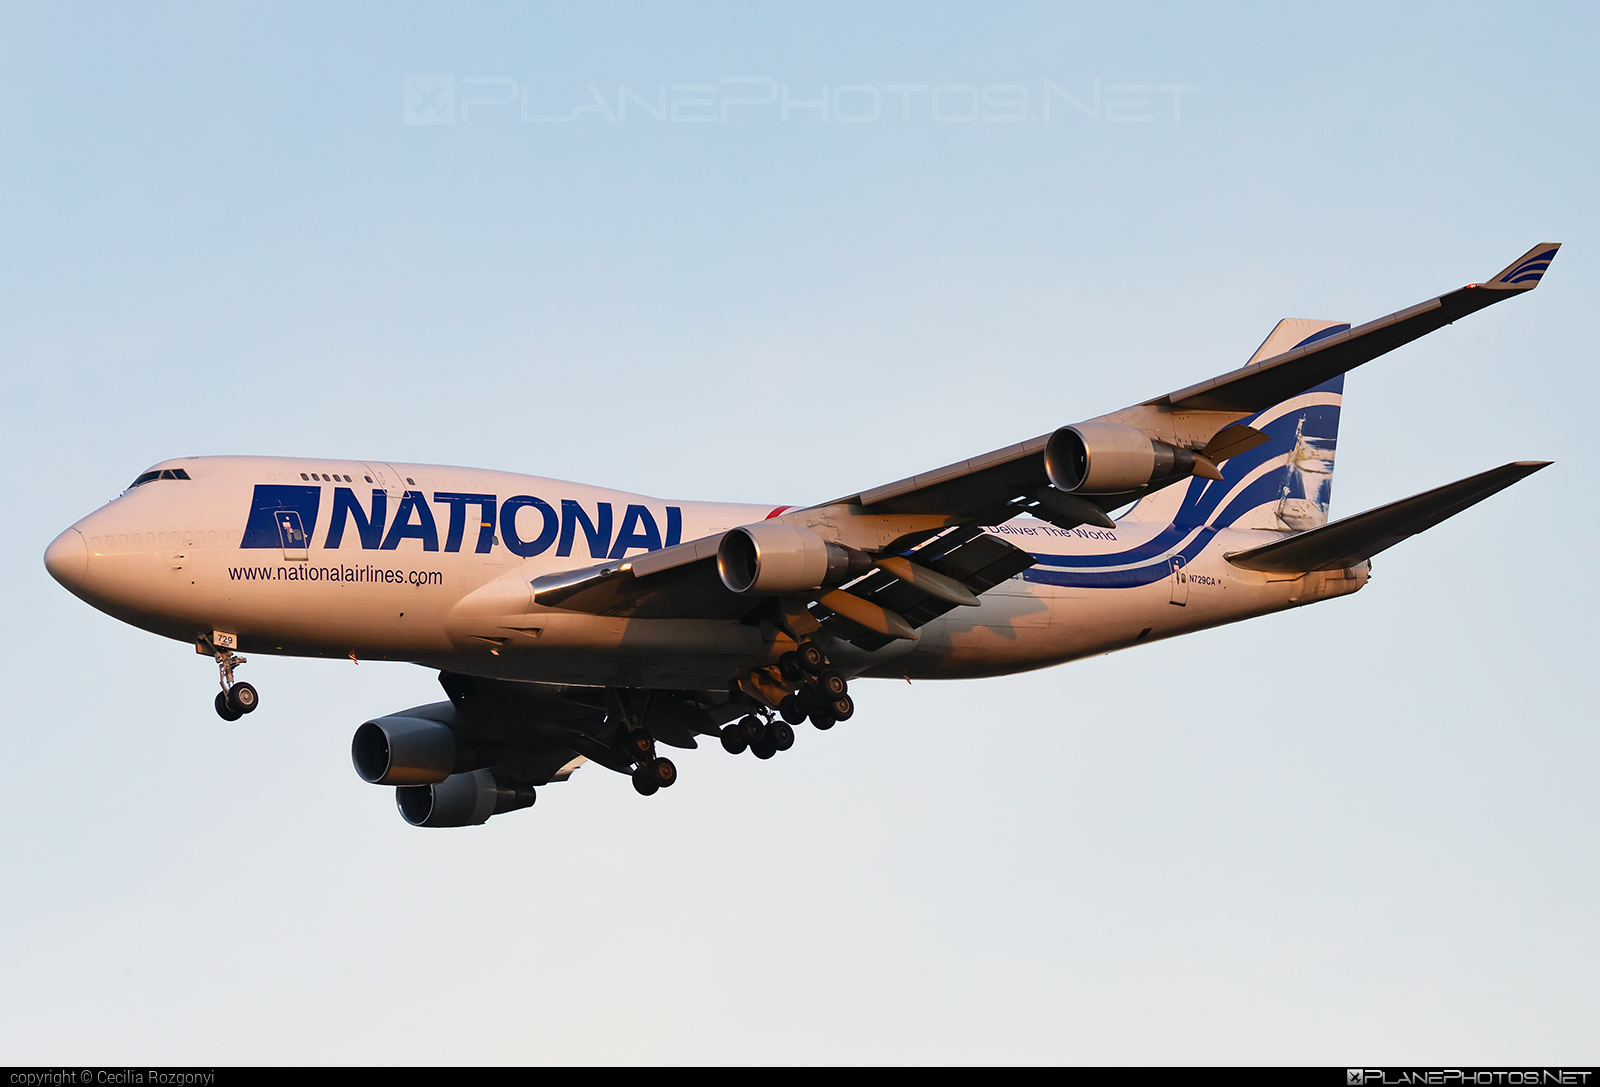 Boeing 747-400BDSF - N729CA operated by National Airlines #b747 #b747bdsf #b747freighter #bedekspecialfreighter #boeing #boeing747 #jumbo